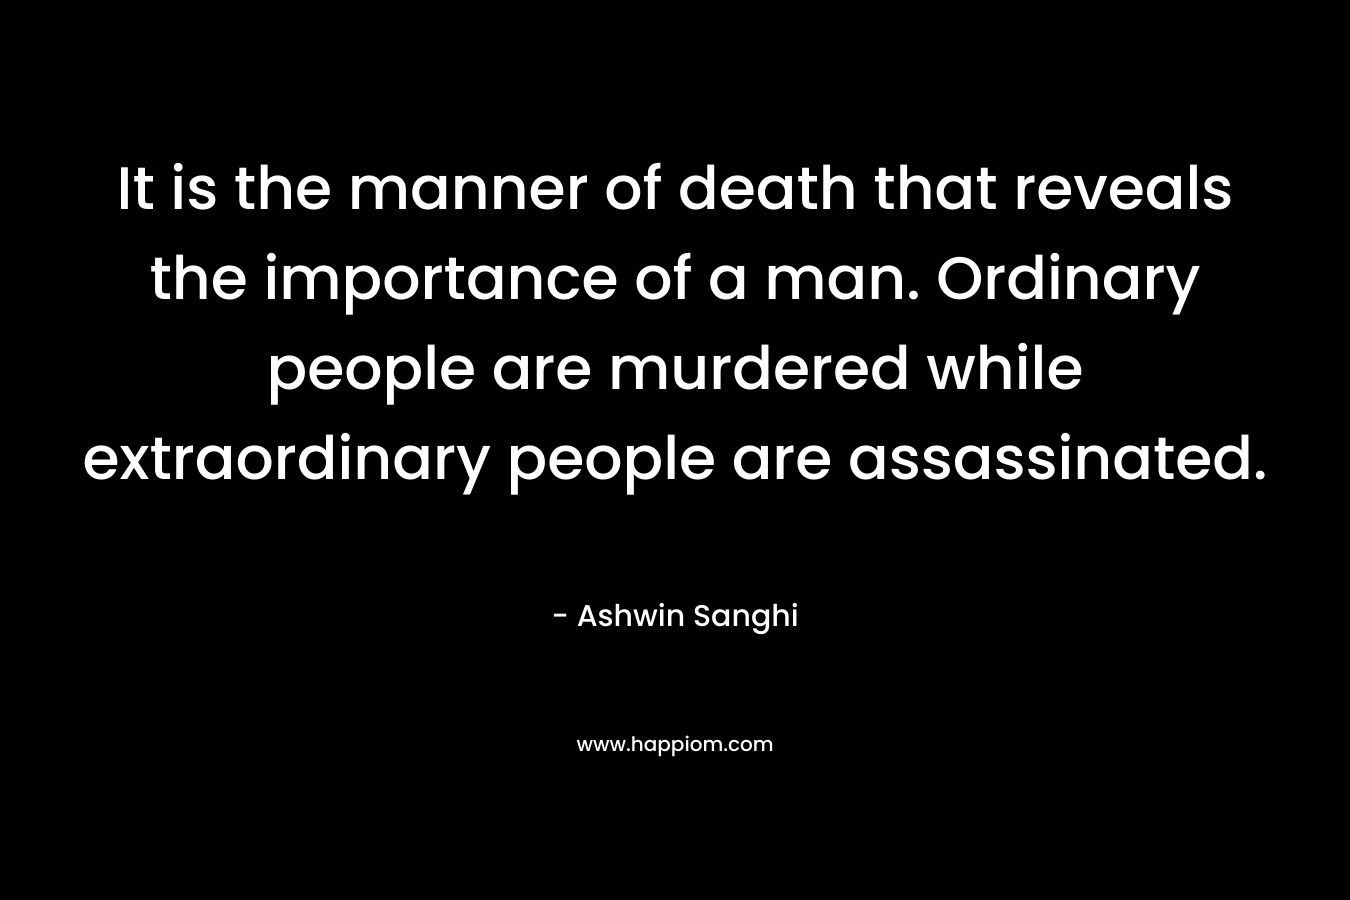 It is the manner of death that reveals the importance of a man. Ordinary people are murdered while extraordinary people are assassinated. – Ashwin Sanghi